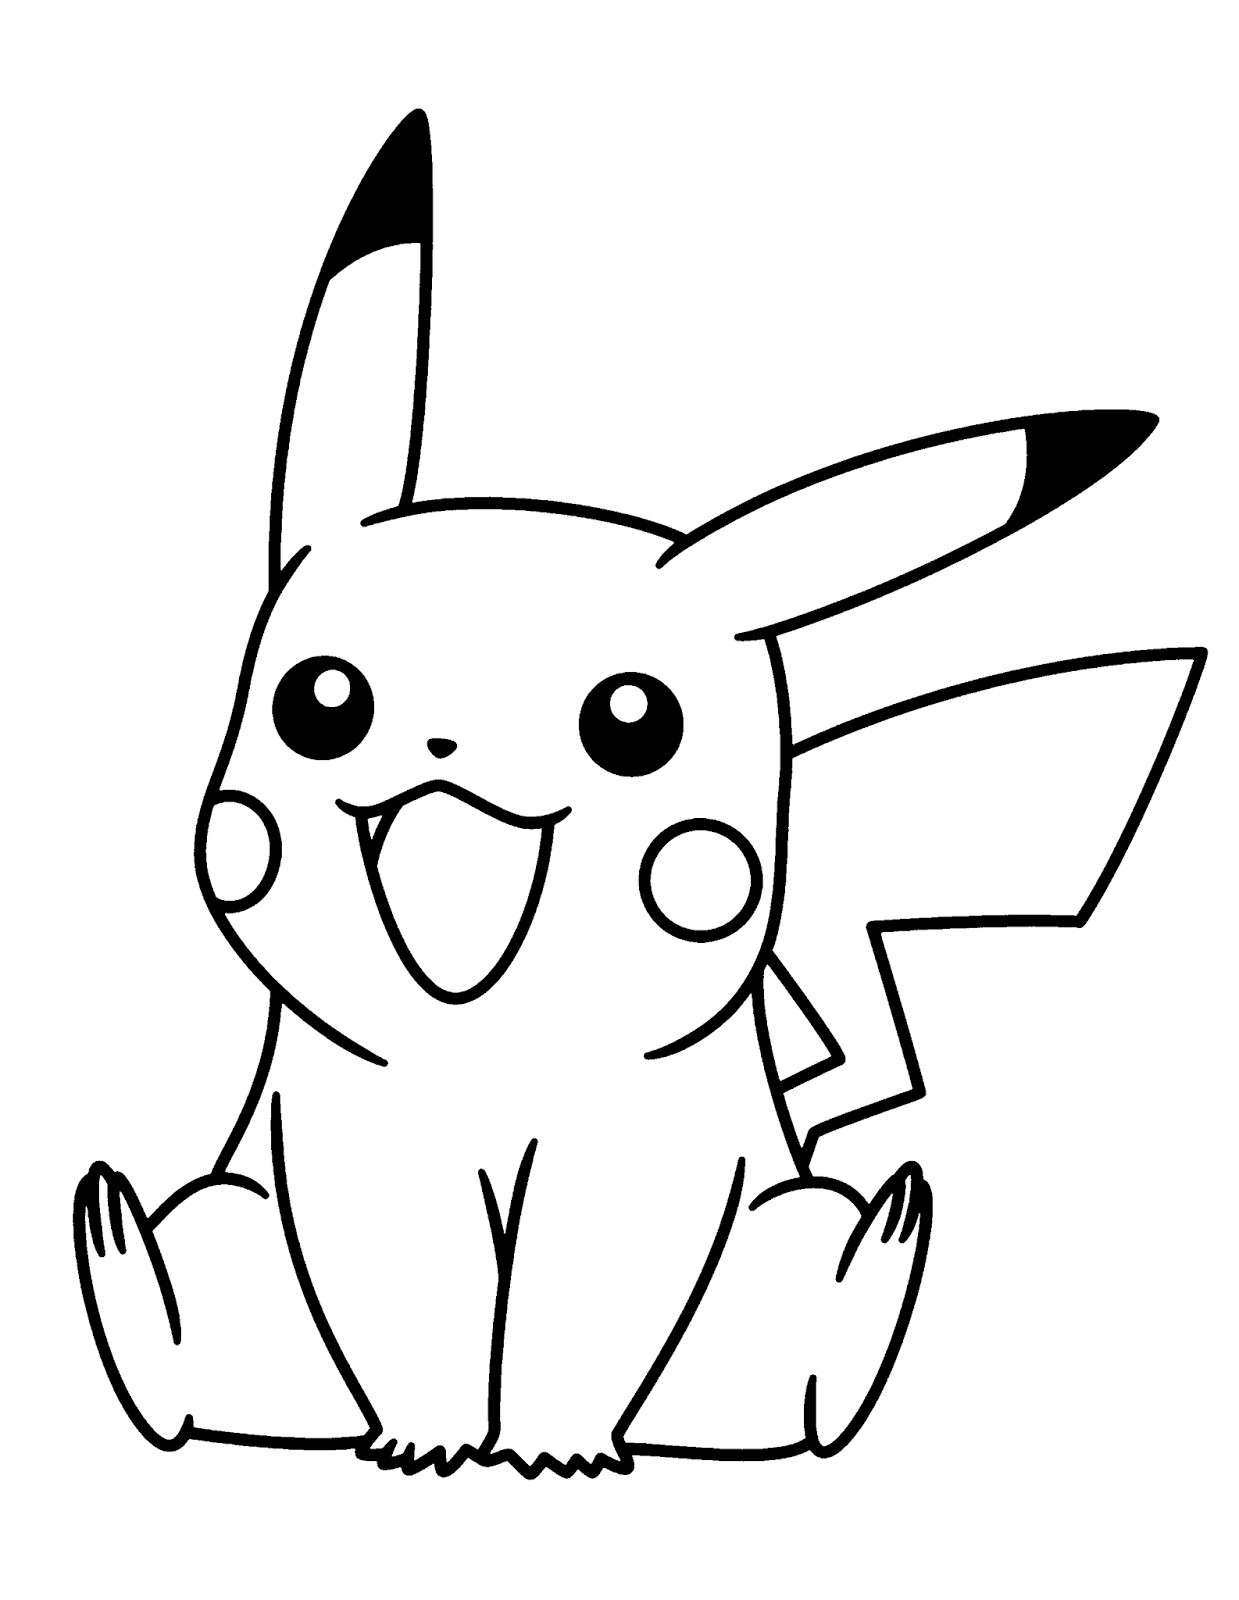 Pokemon Printable Coloring Pages
 Coloring Pages Pokemon Coloring Pages Free and Printable